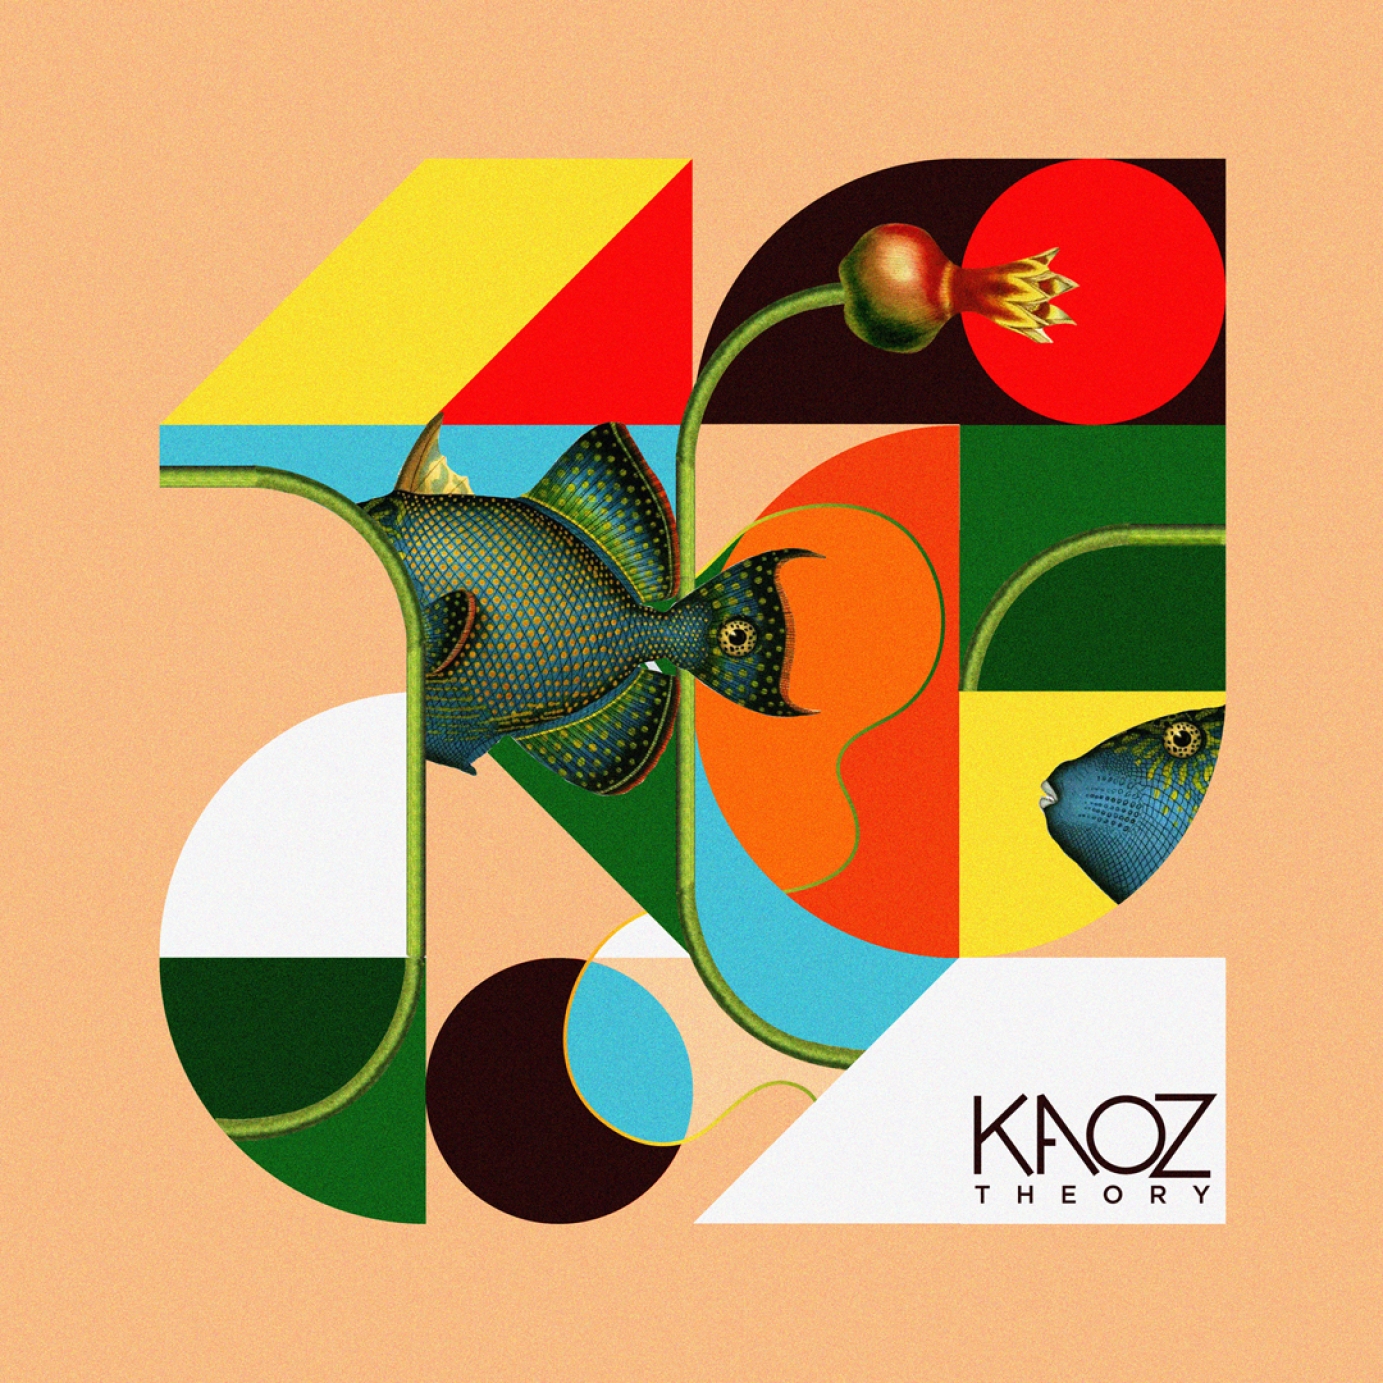 Selected artworks for the Record Label, Kaoz Theory